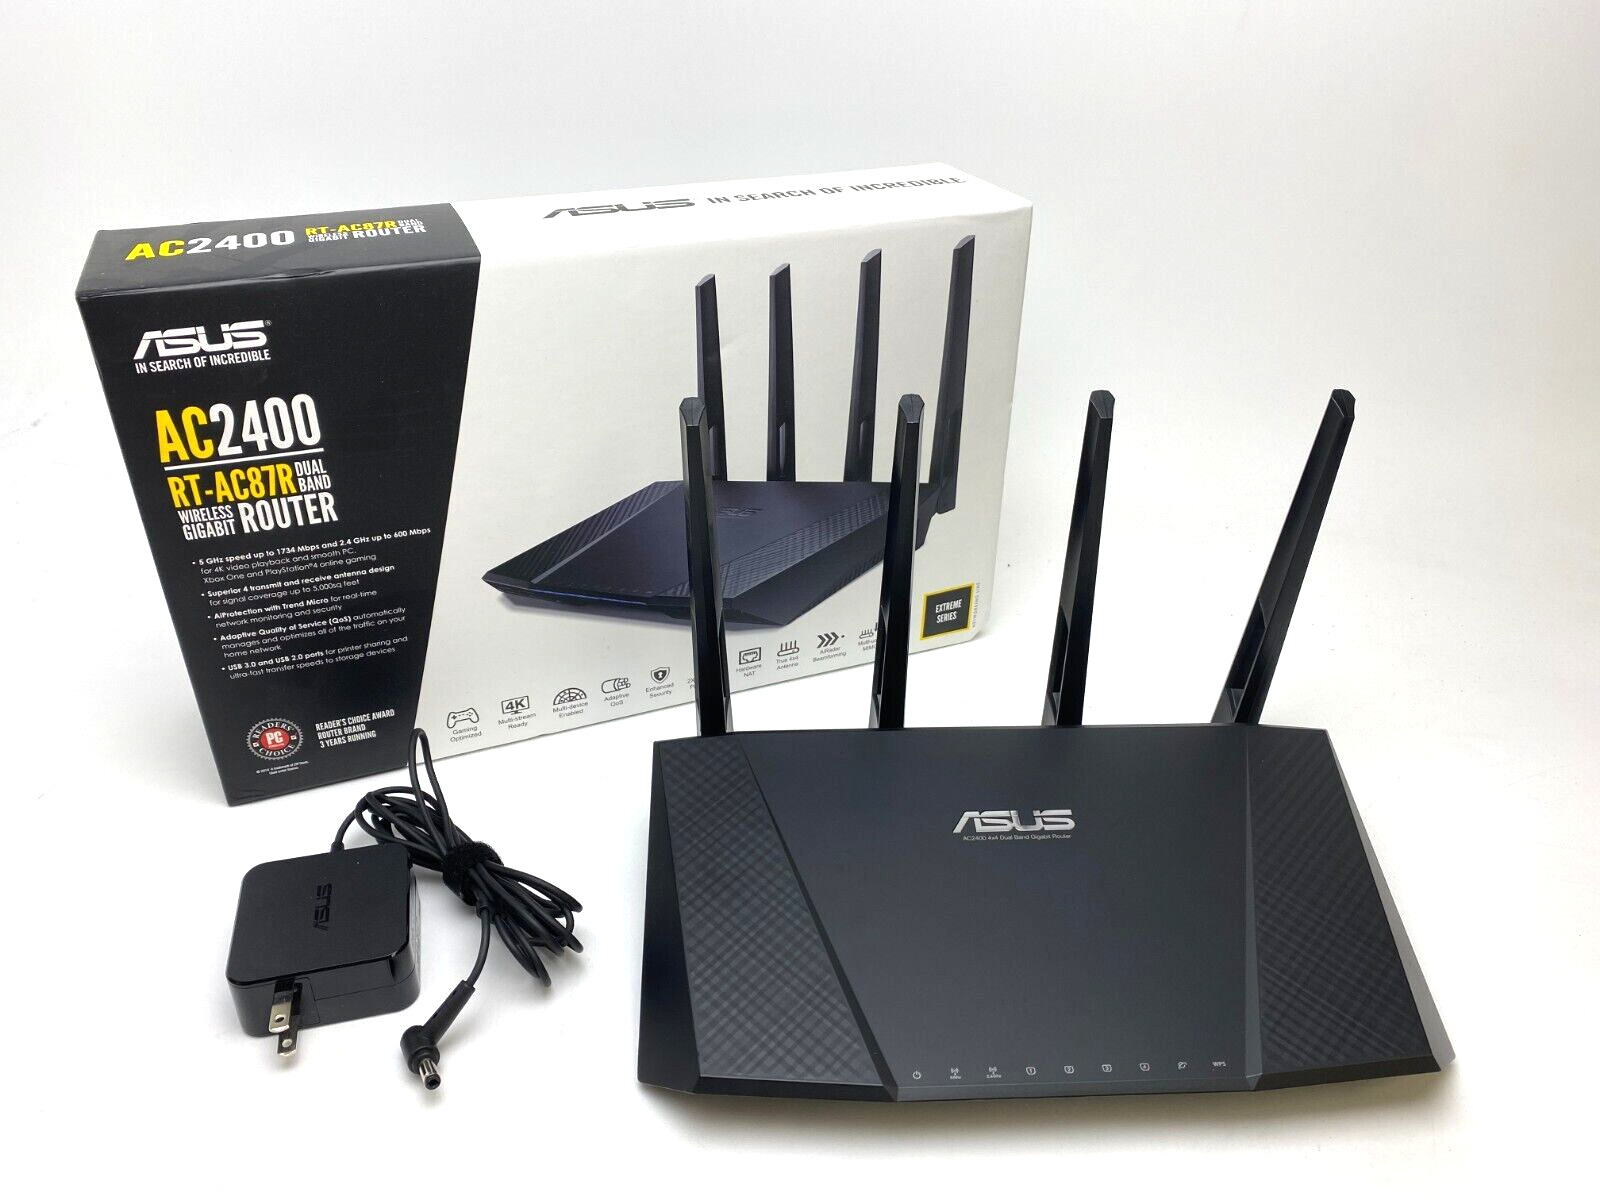 ASUS AC2400 RT-AC87R 4x4 DUAL BAND WIRELESS GIGABIT ROUTER WIFI/GAMING/MIMO/USB3